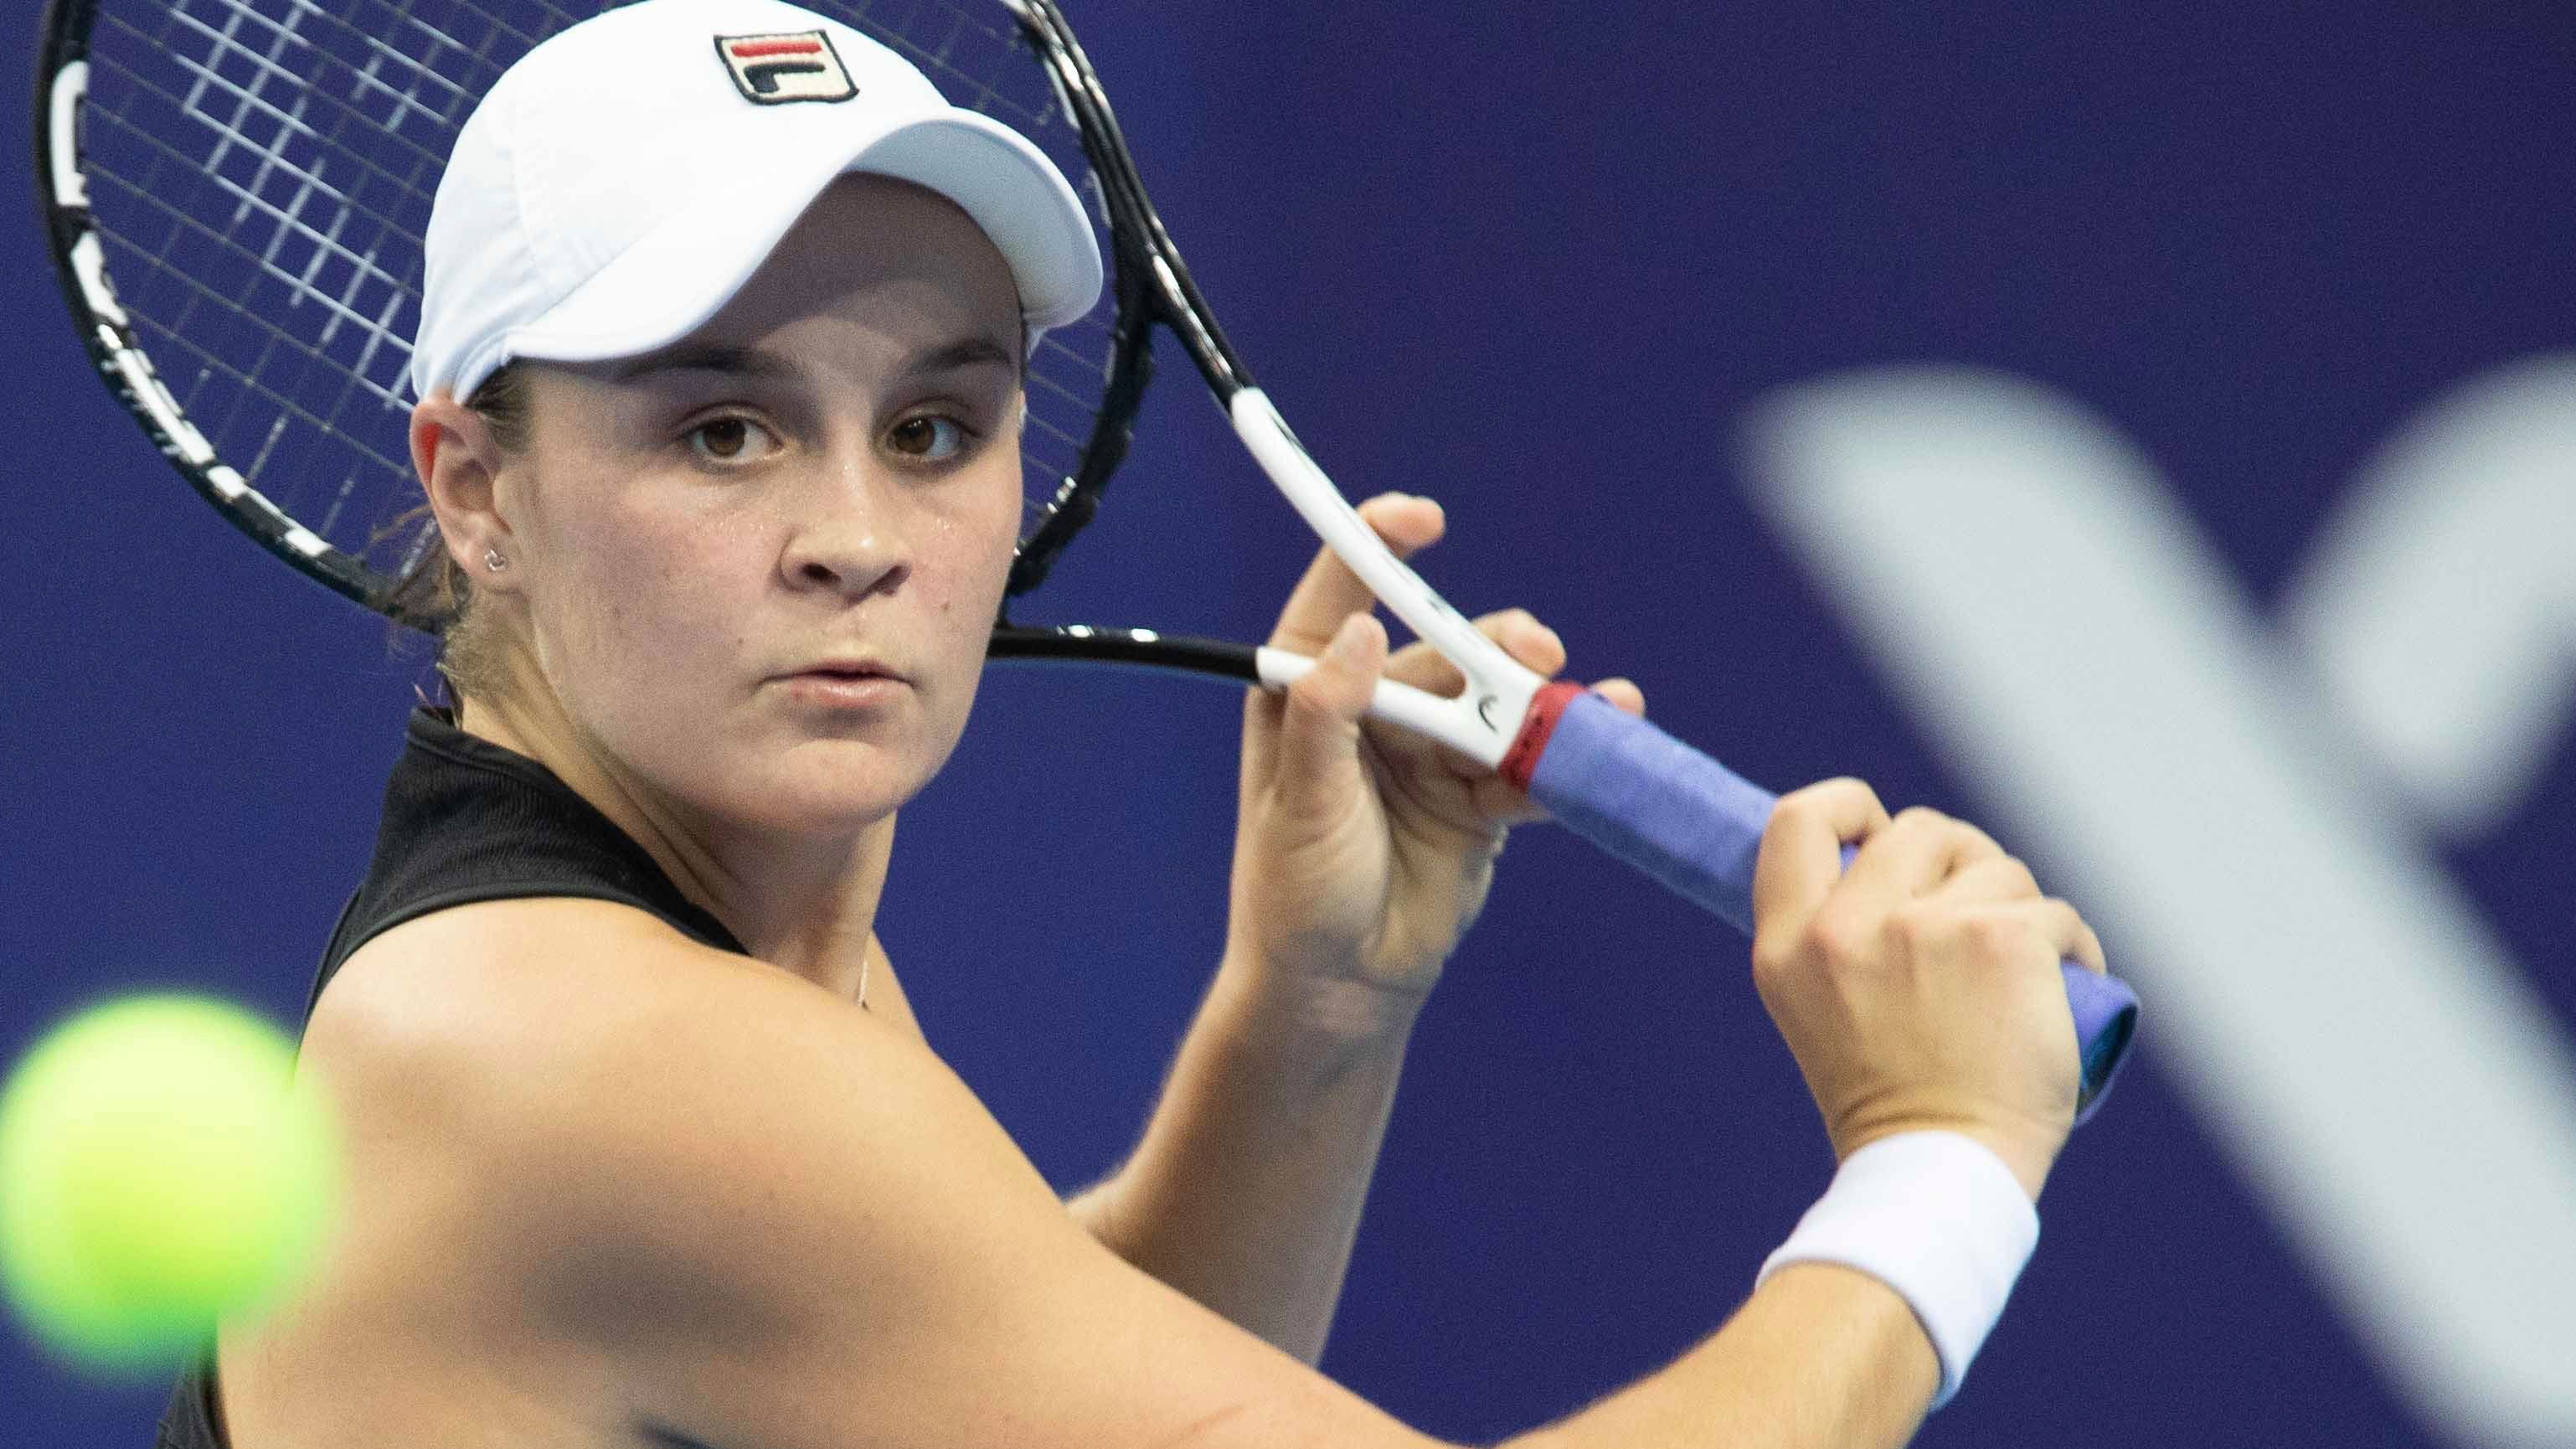 Aussie star Ash Barty ready to contend for grand slam glory